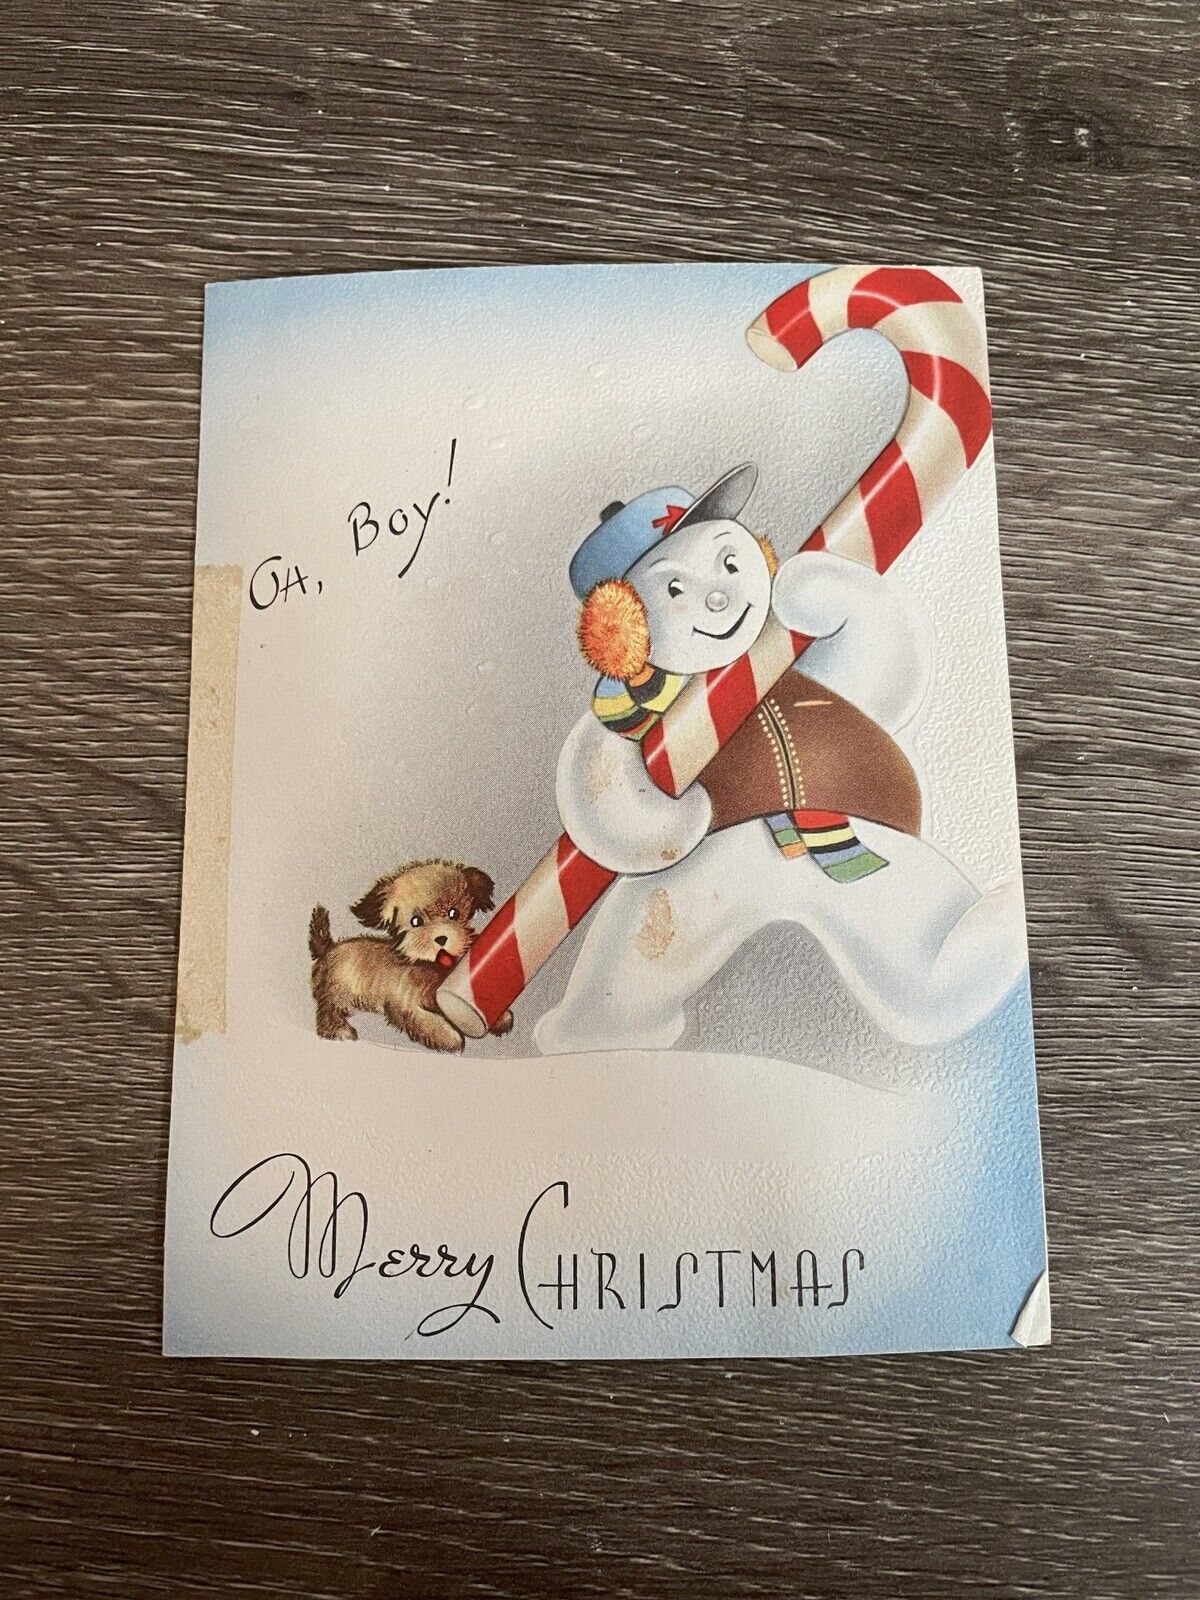 Vintage Christmas Card Snowman Carrying Candy cane, Used